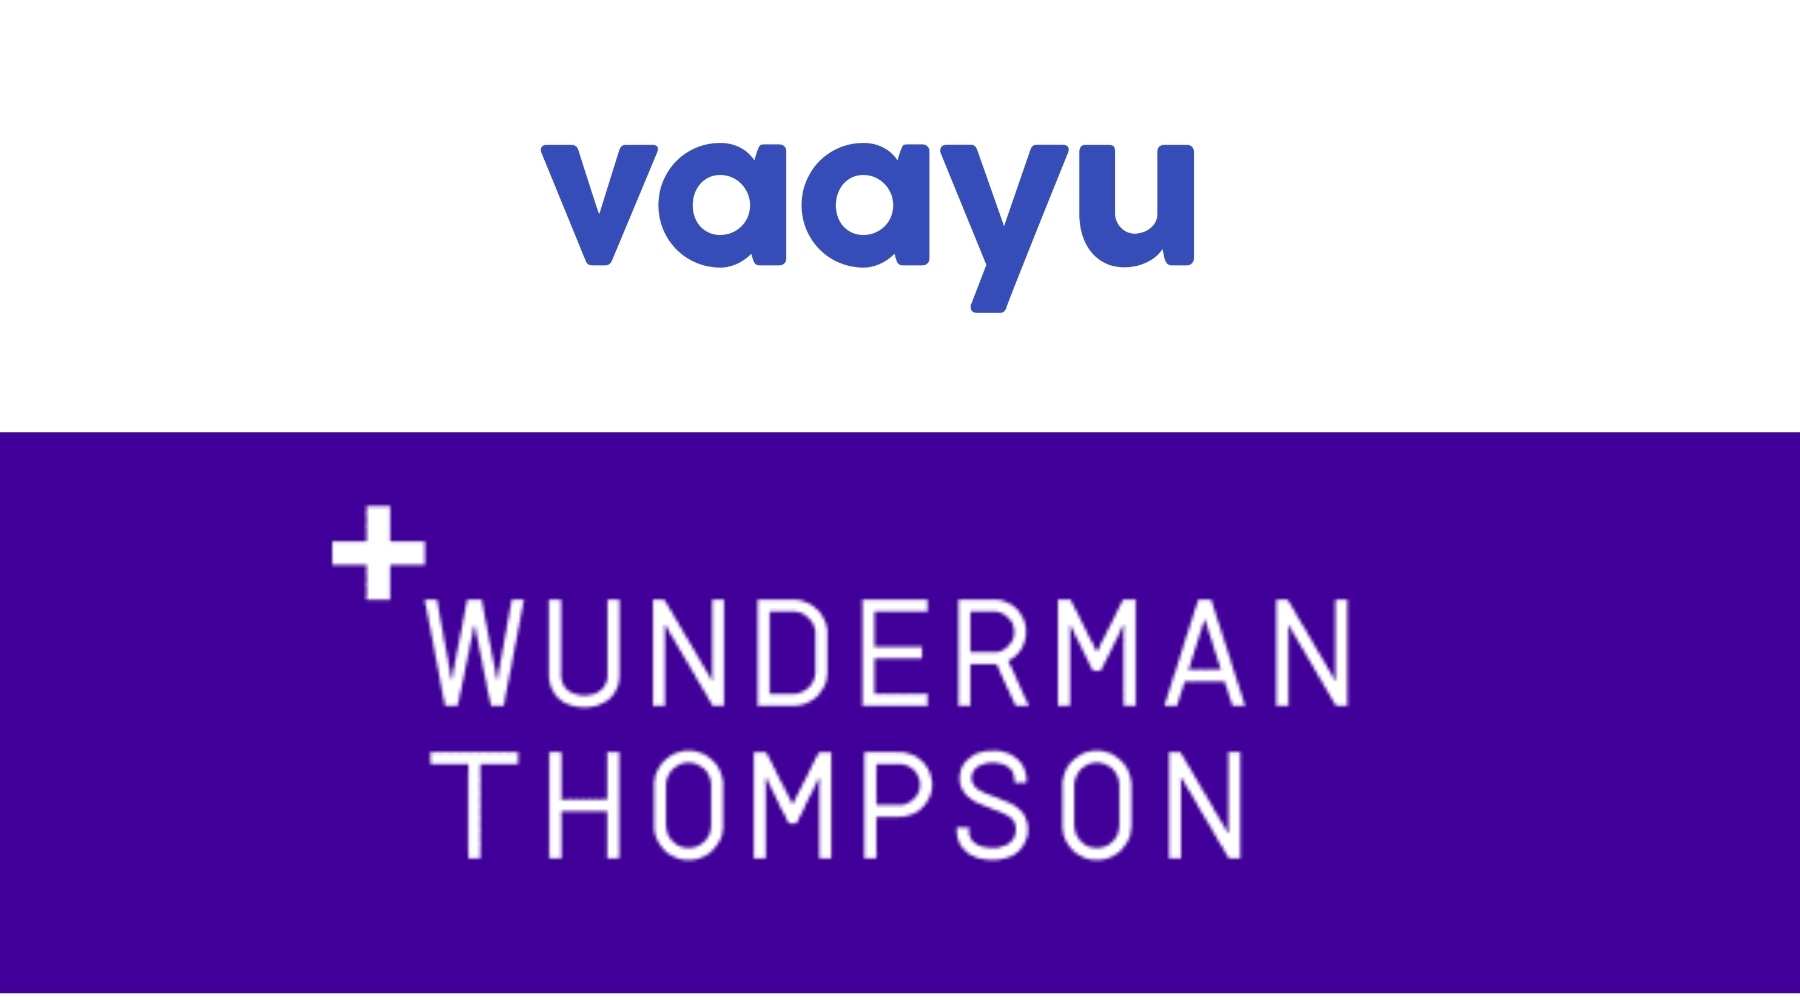 Wunderman Thompson Commerce Partners with Vaayu to Bolster Sustainability.